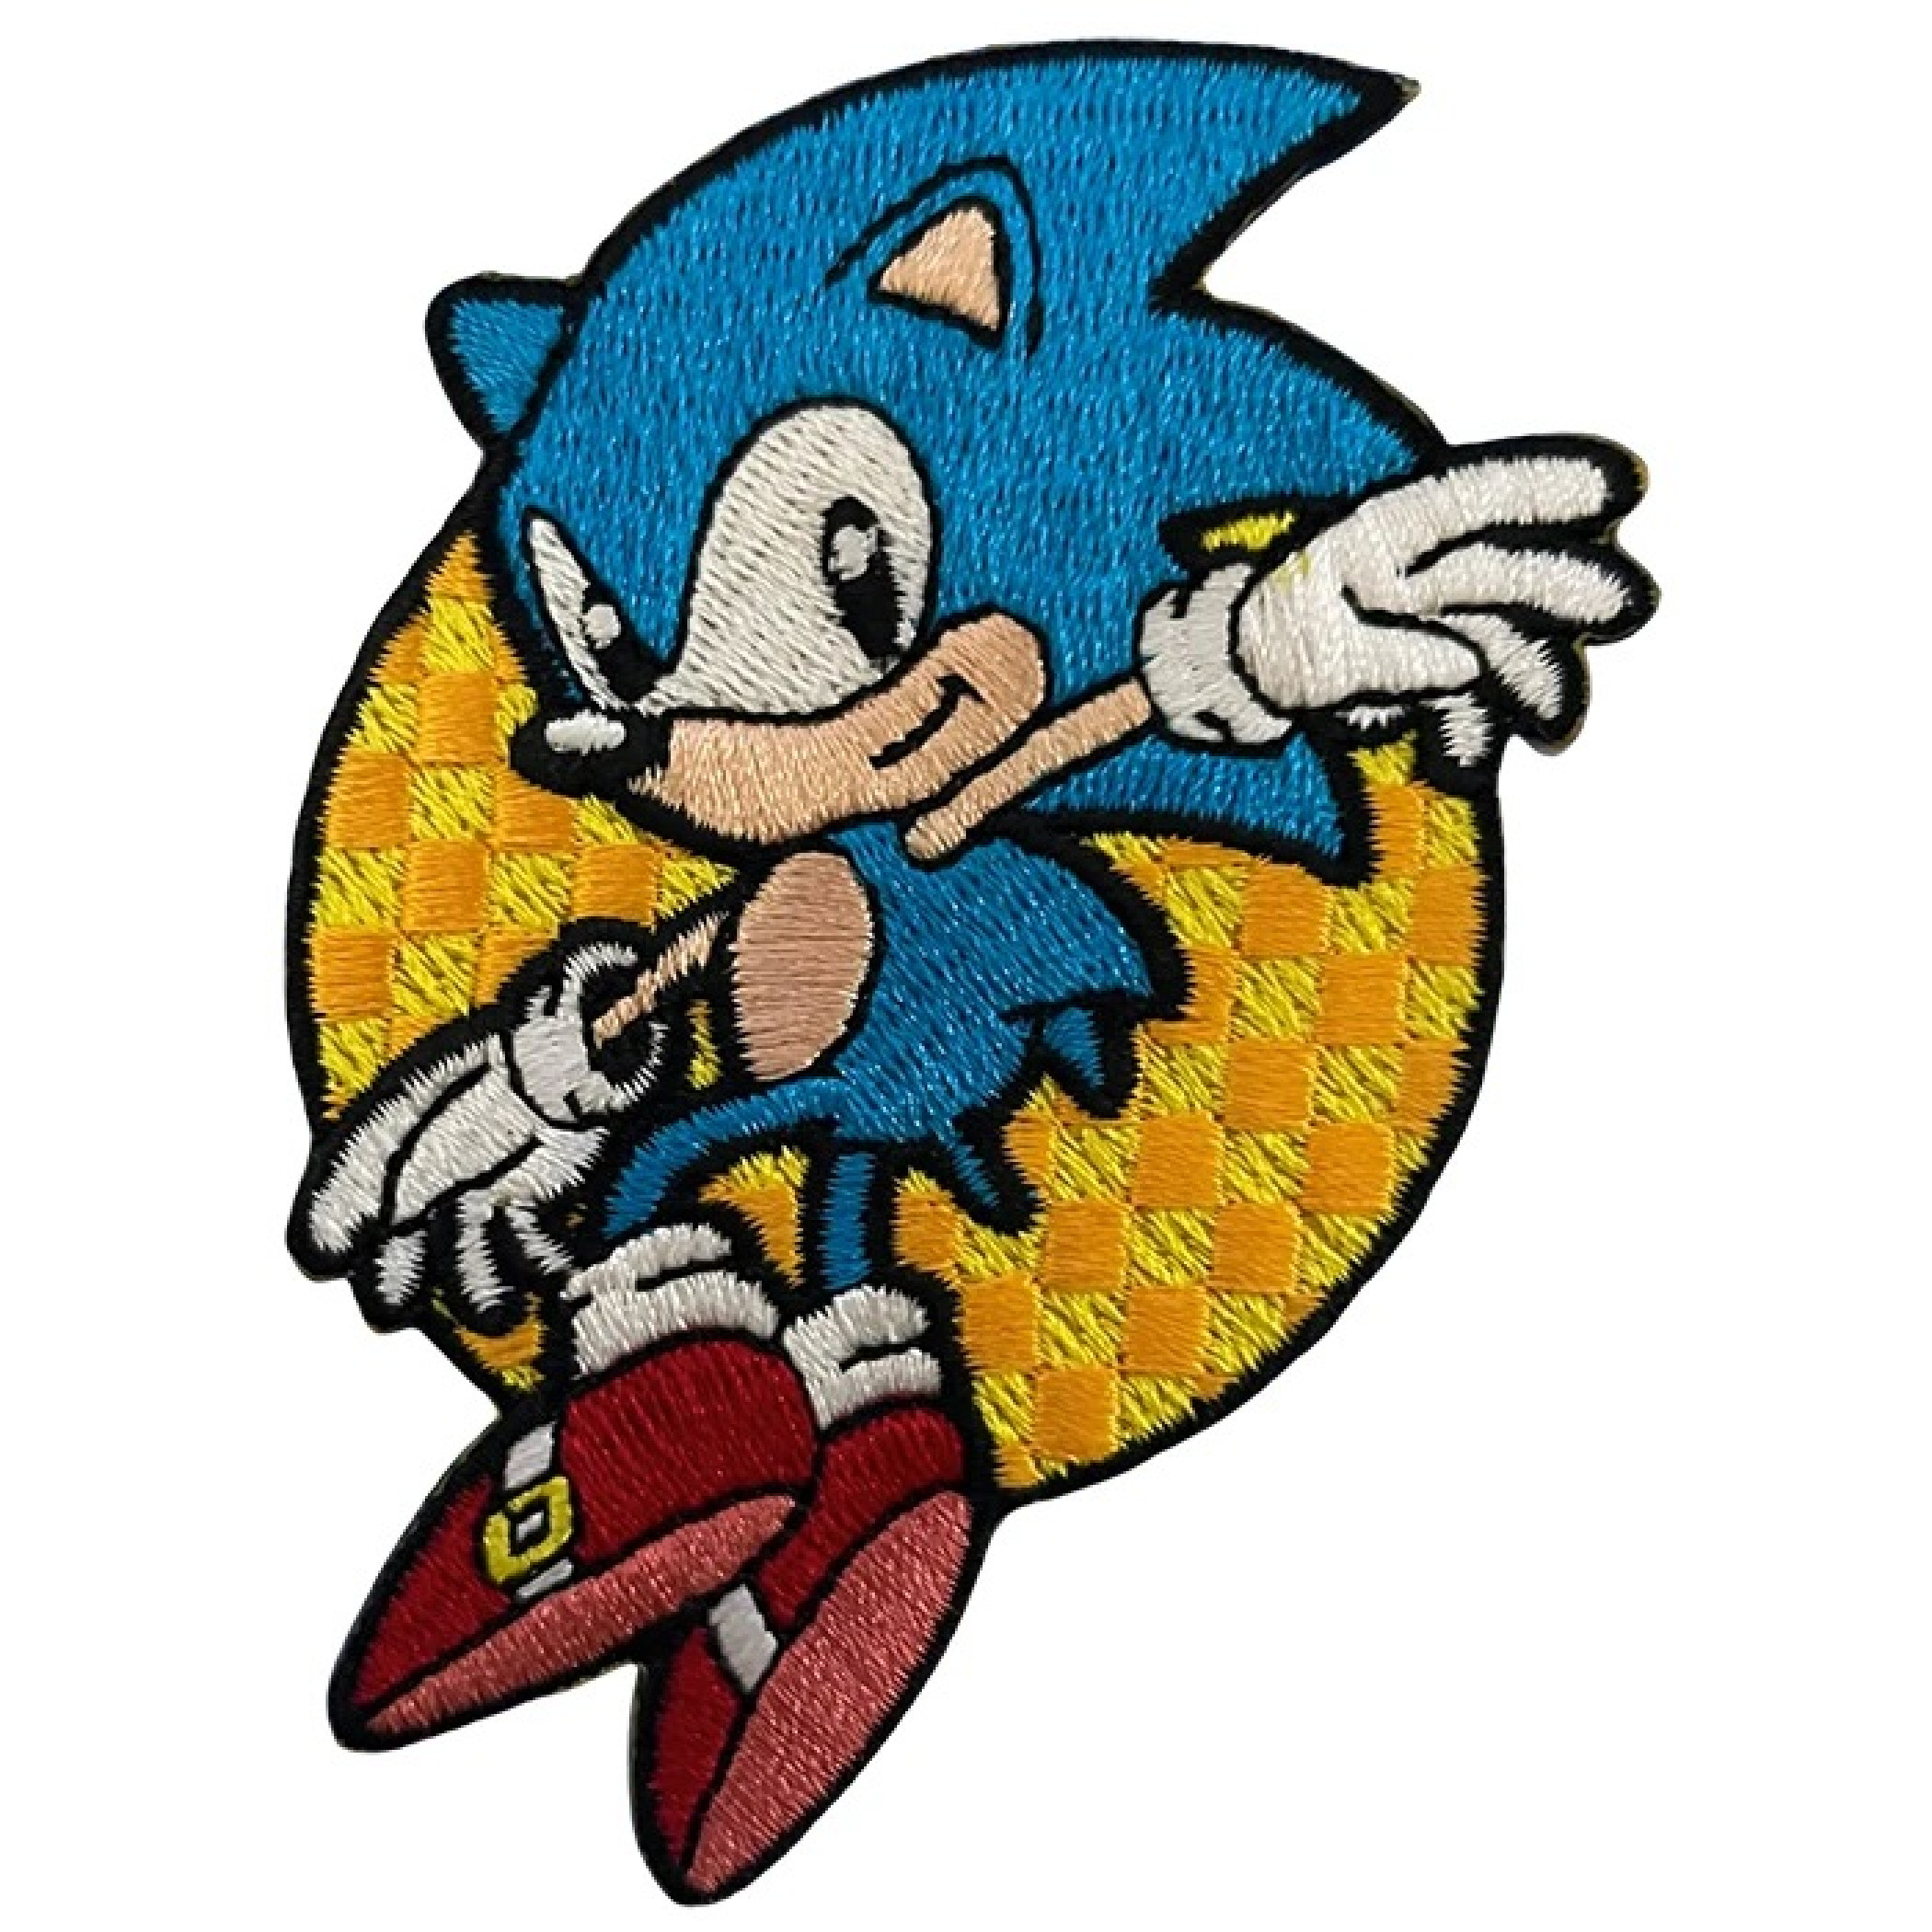 Leaping Sonic The Hedgehog Patch